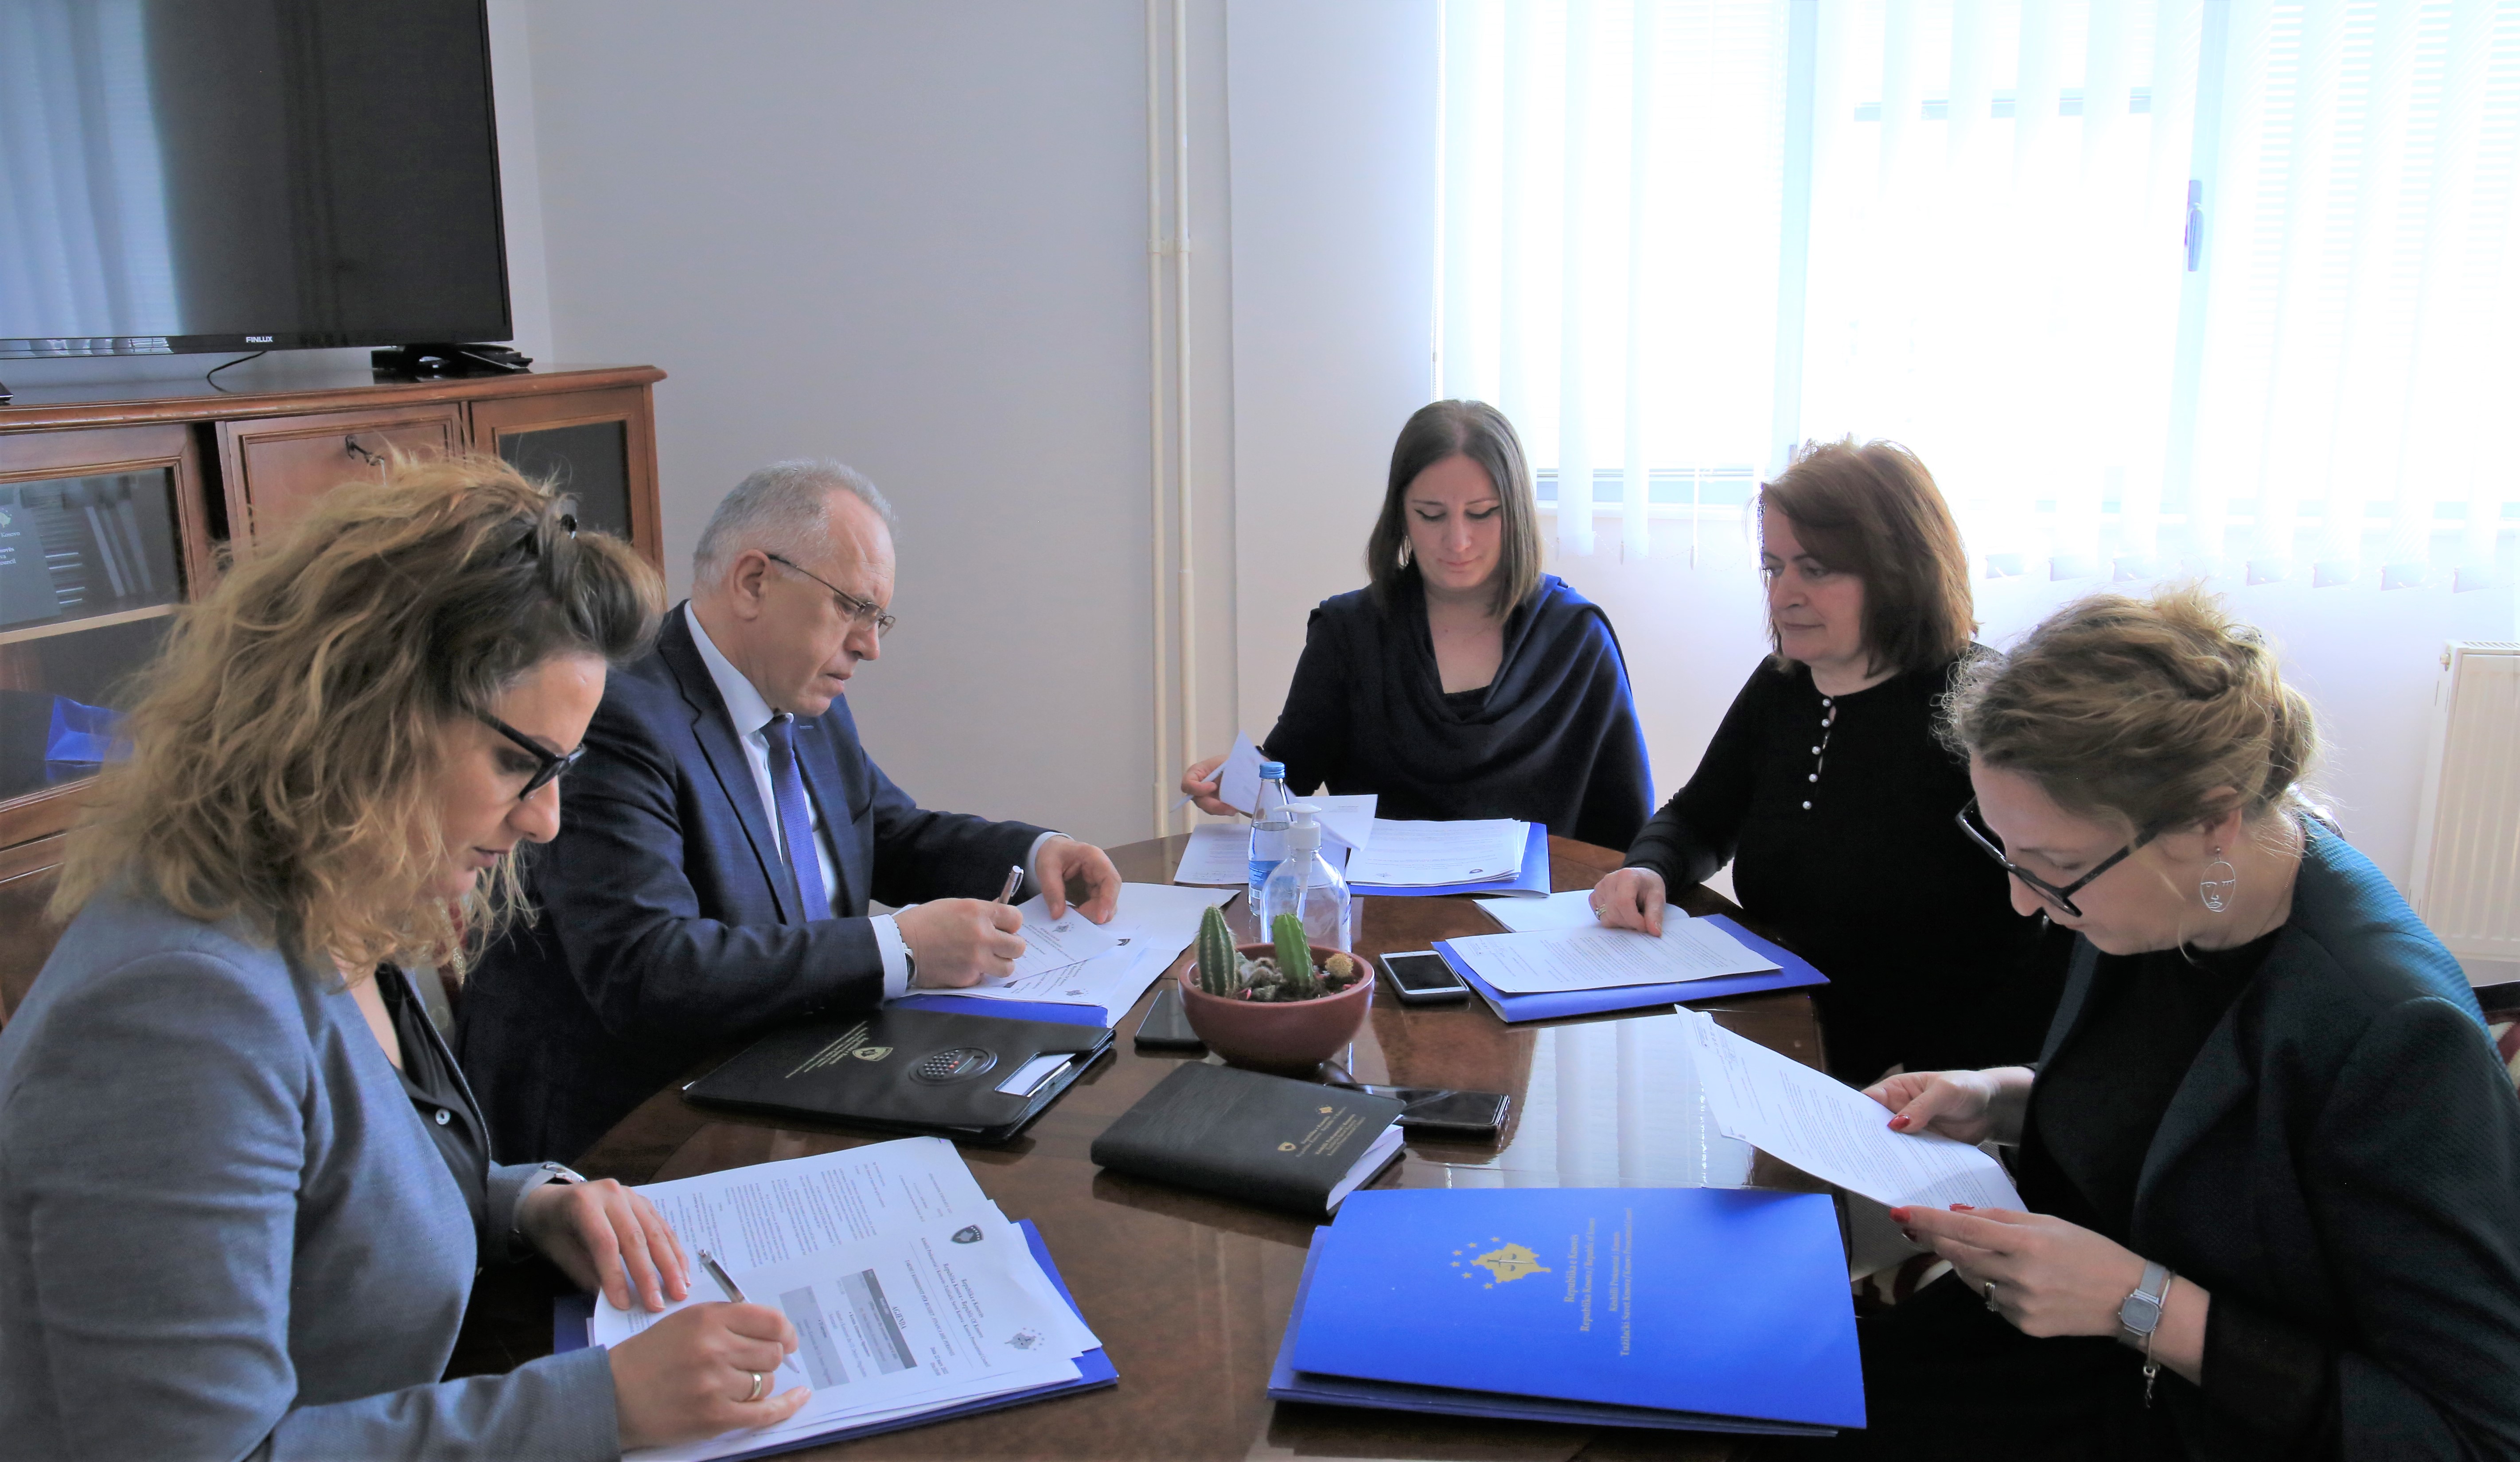 The next meeting of the Committee on Budget, Finance and Personnel is held